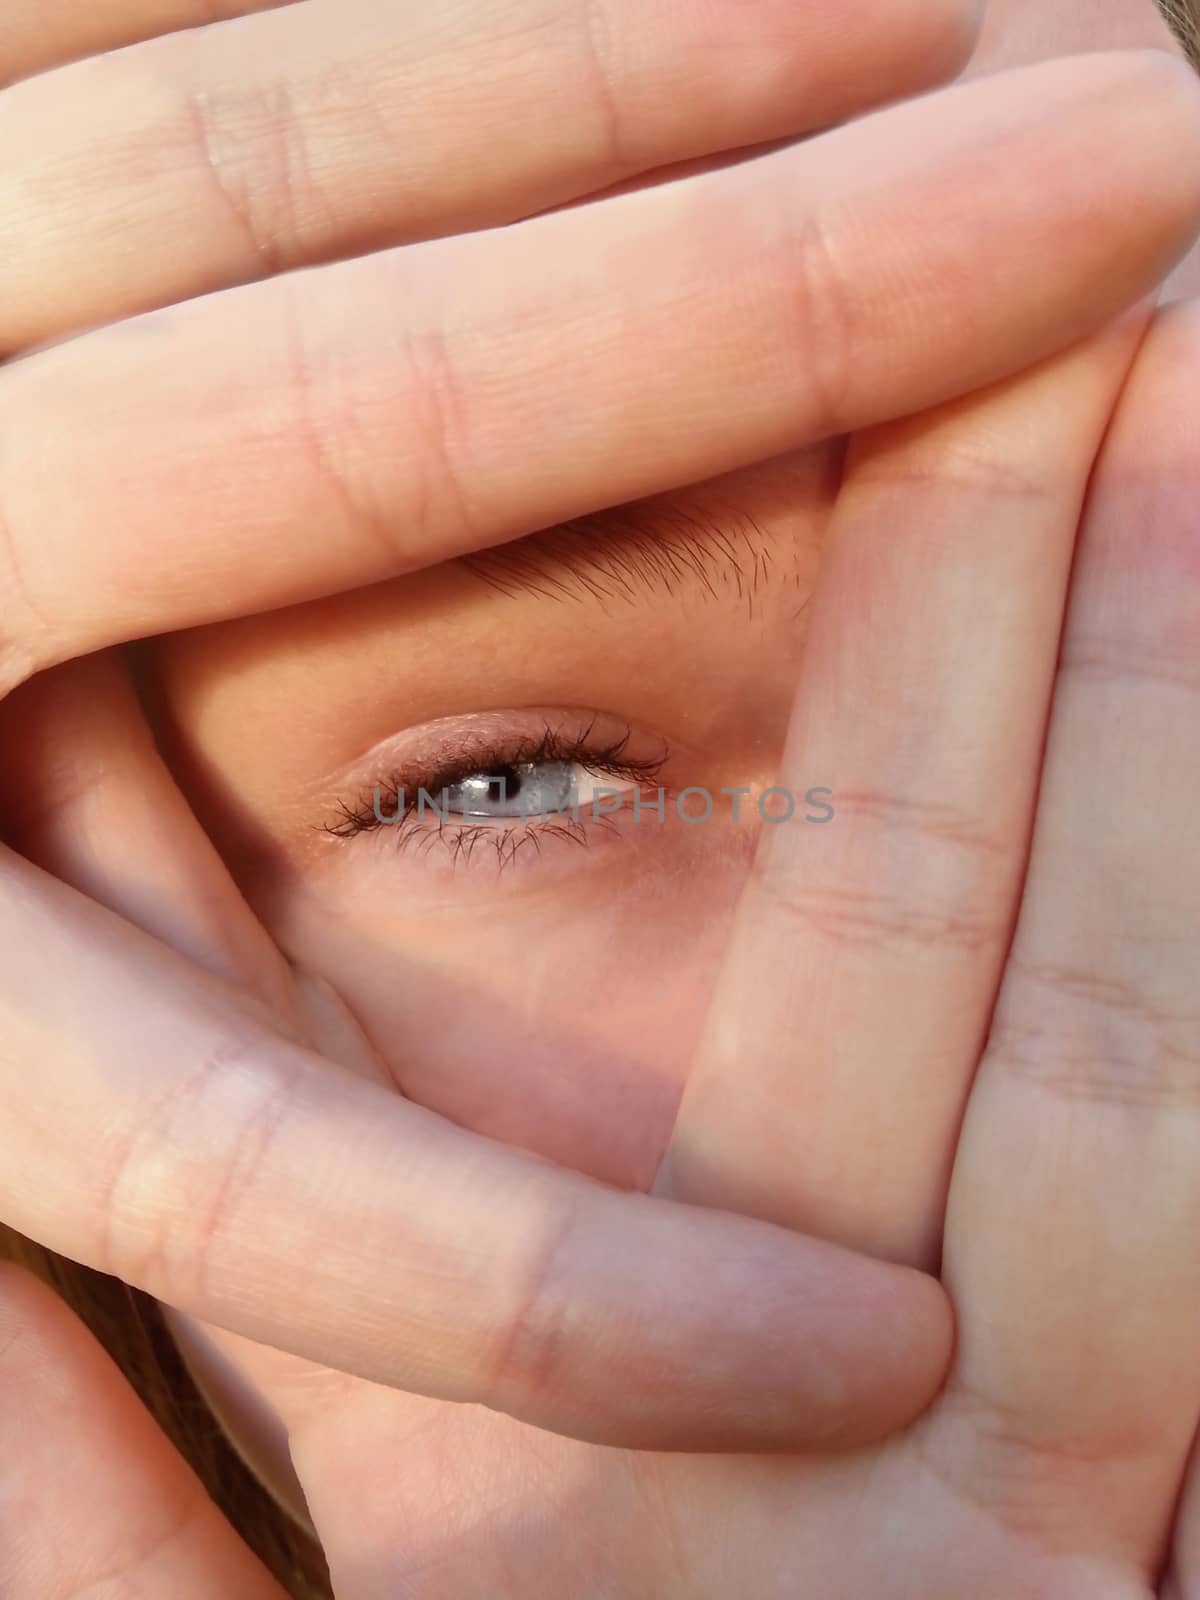 Fingers covering a blue eye which is squinting